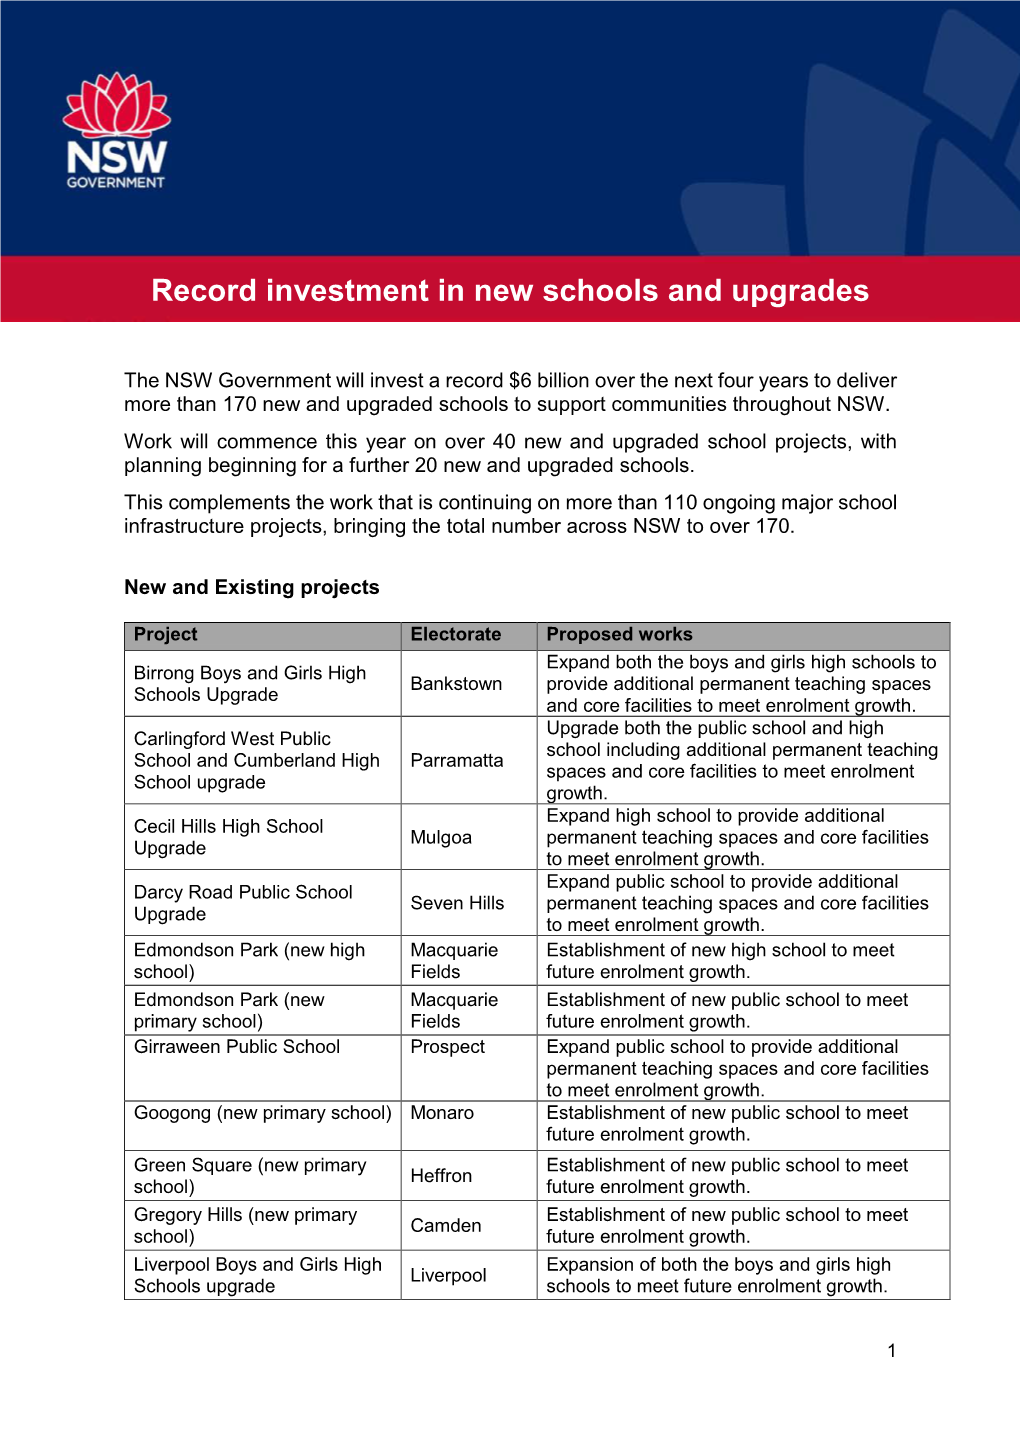 Record Investment in New Schools and Upgrades